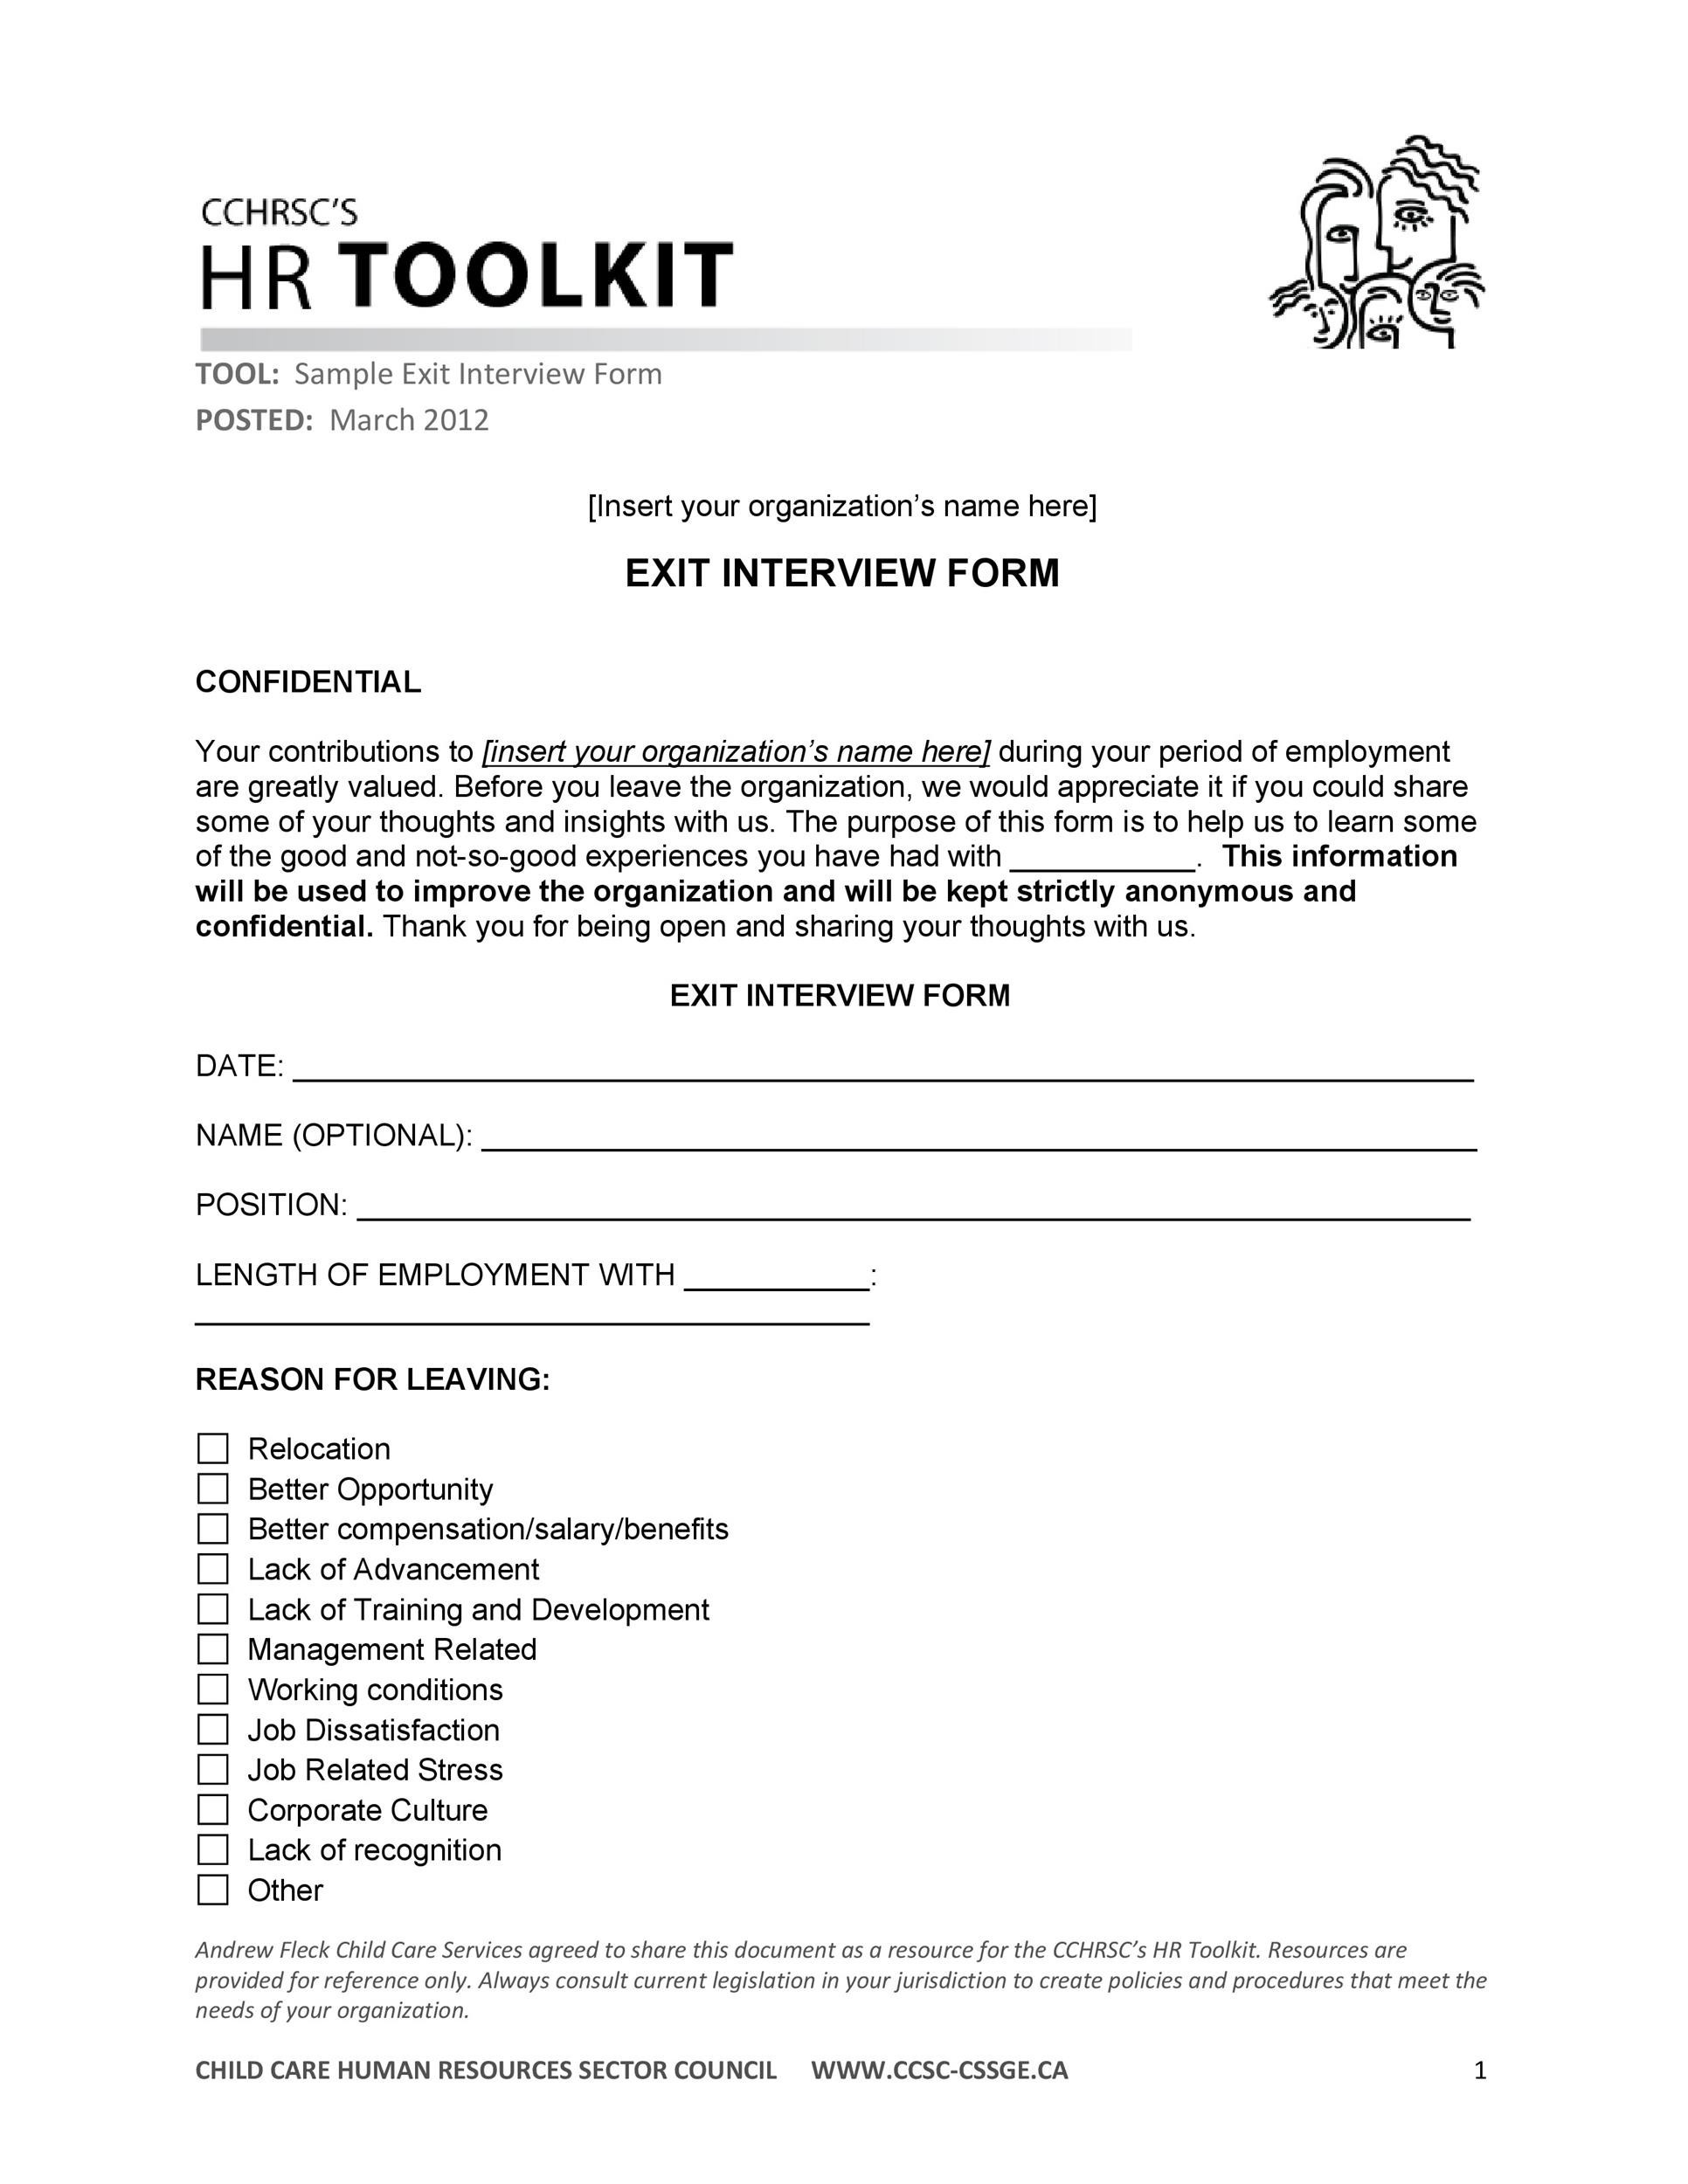 research paper on exit interview